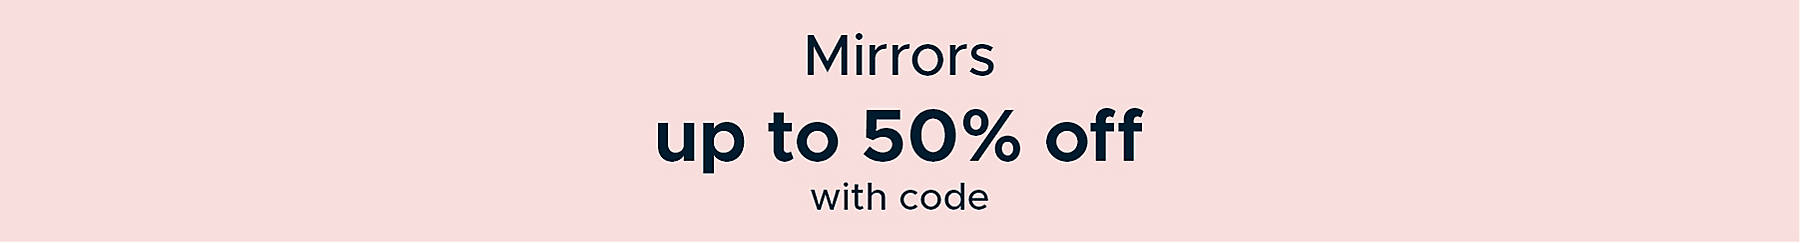 Mirrors up to 50% off with code